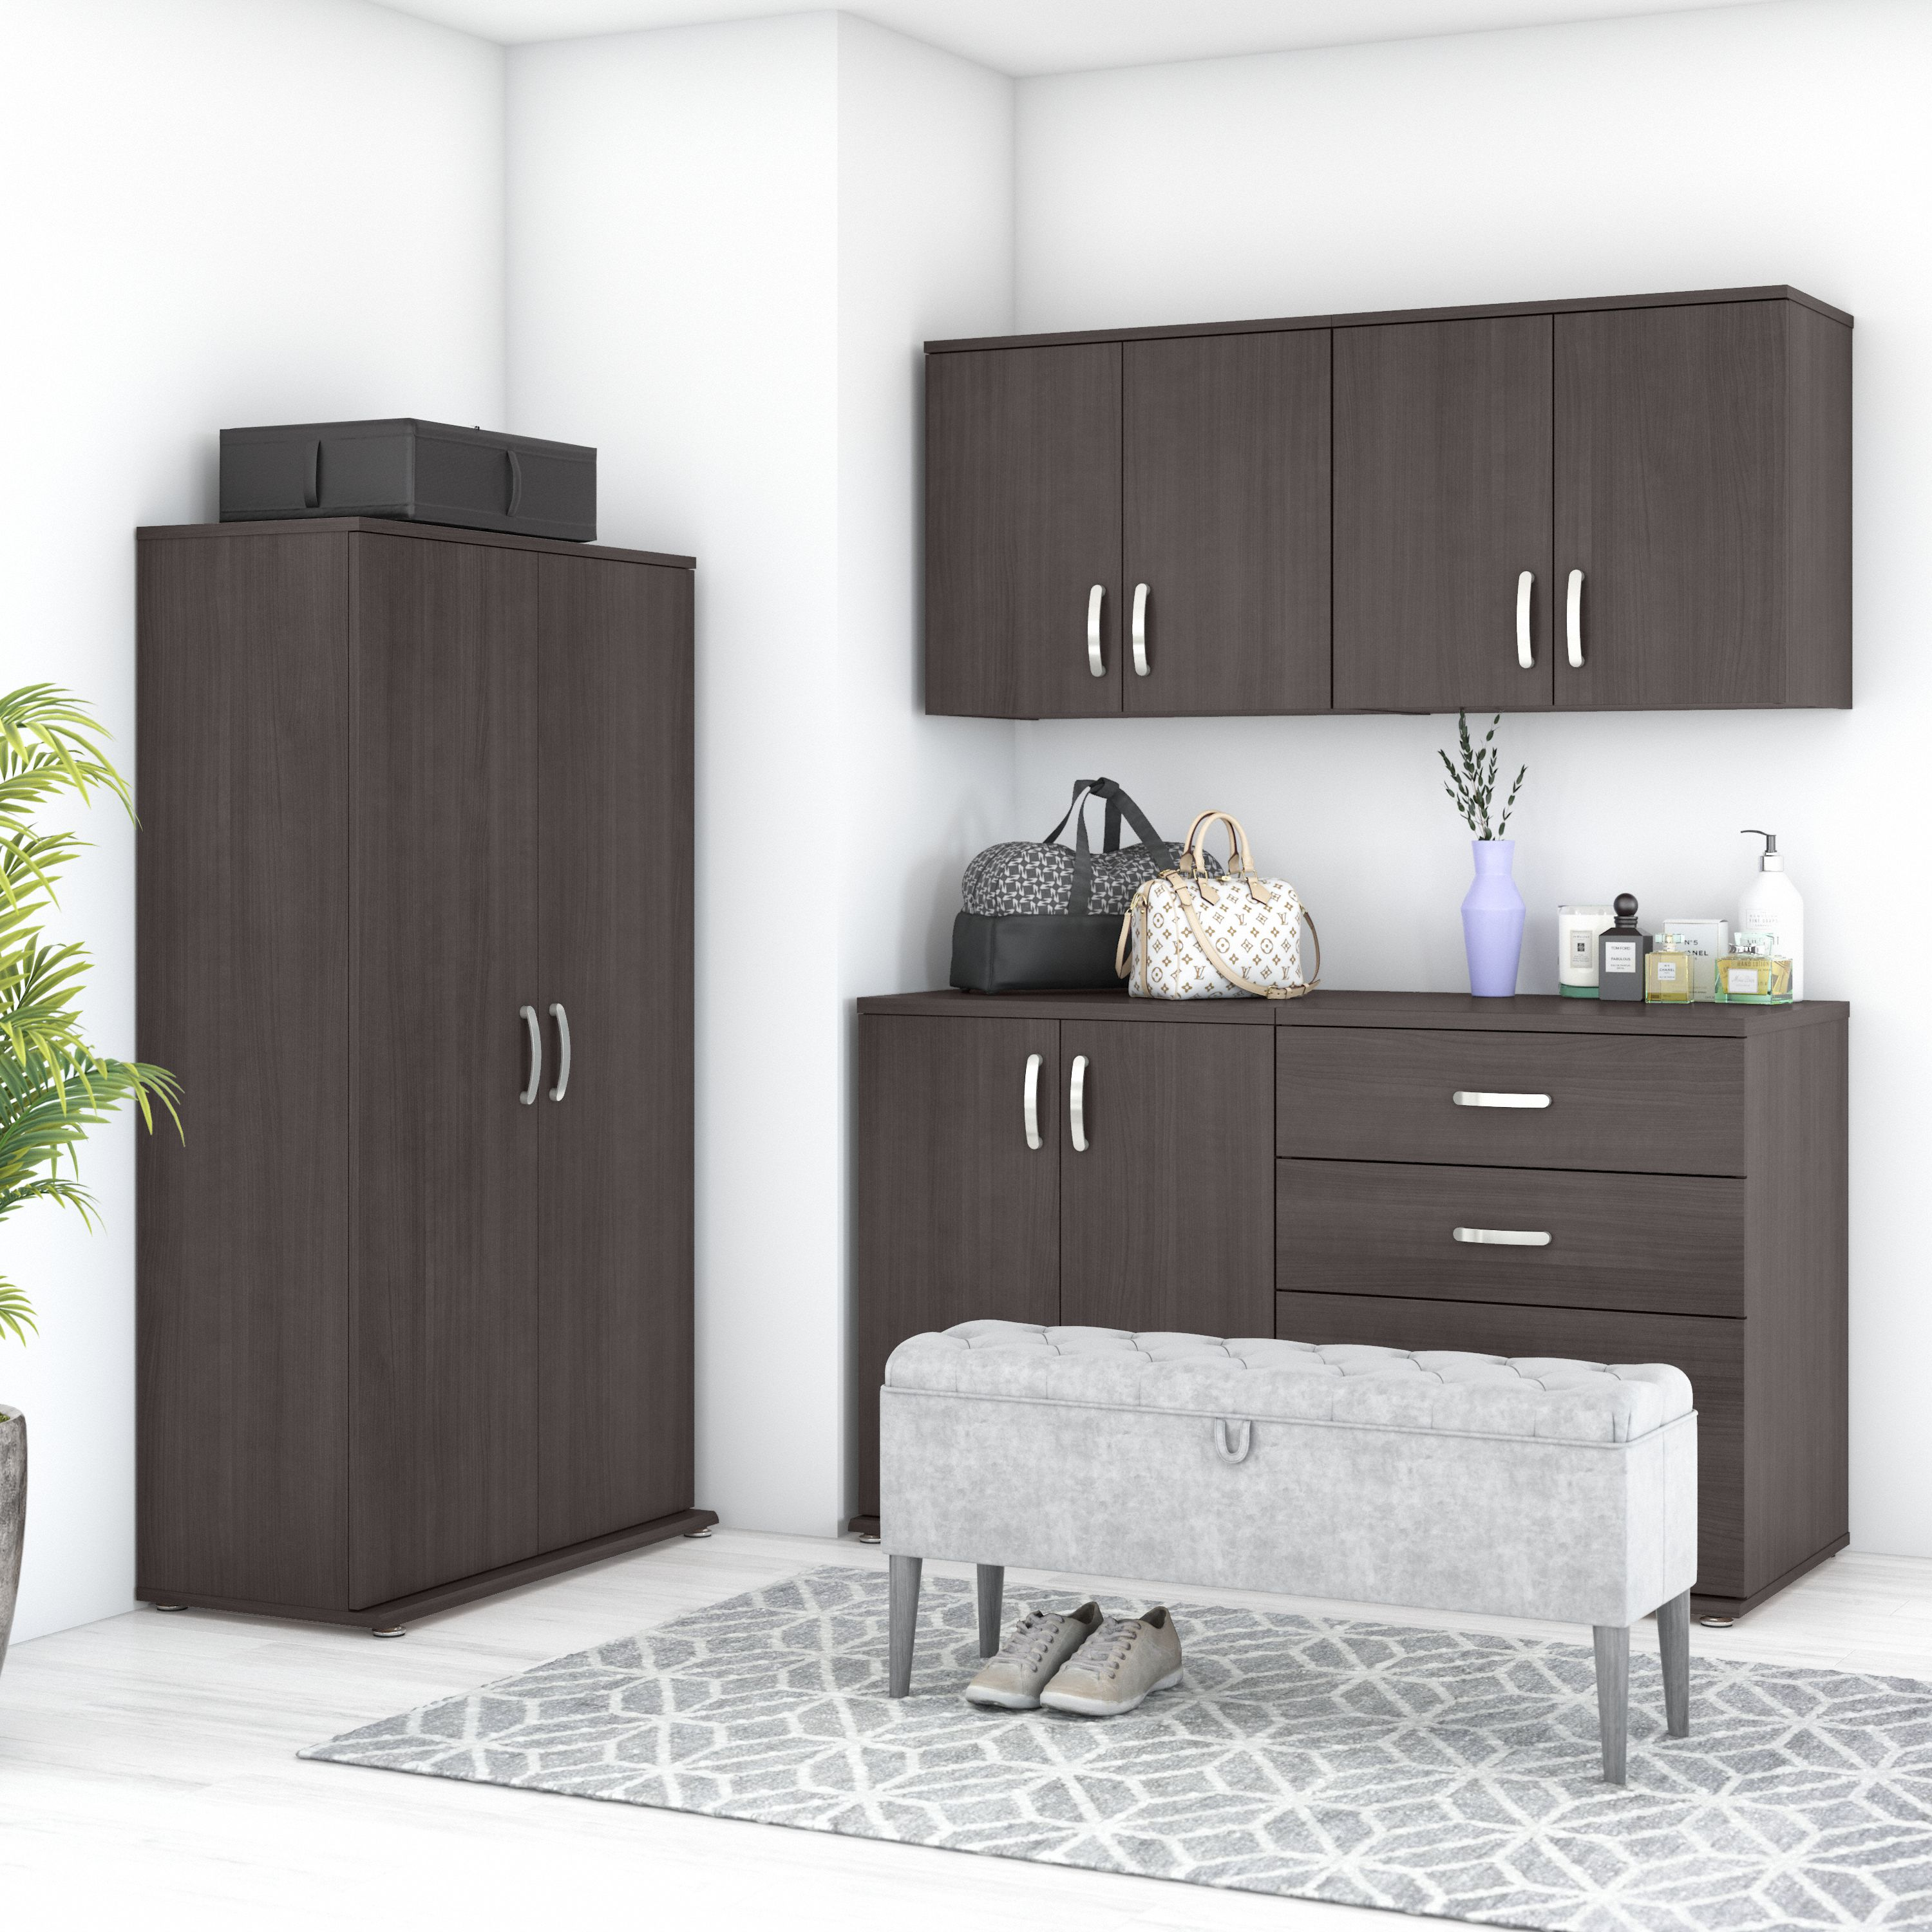 Shop Bush Business Furniture Universal 5 Piece Modular Closet Storage Set with Floor and Wall Cabinets 01 CLS003SG #color_storm gray